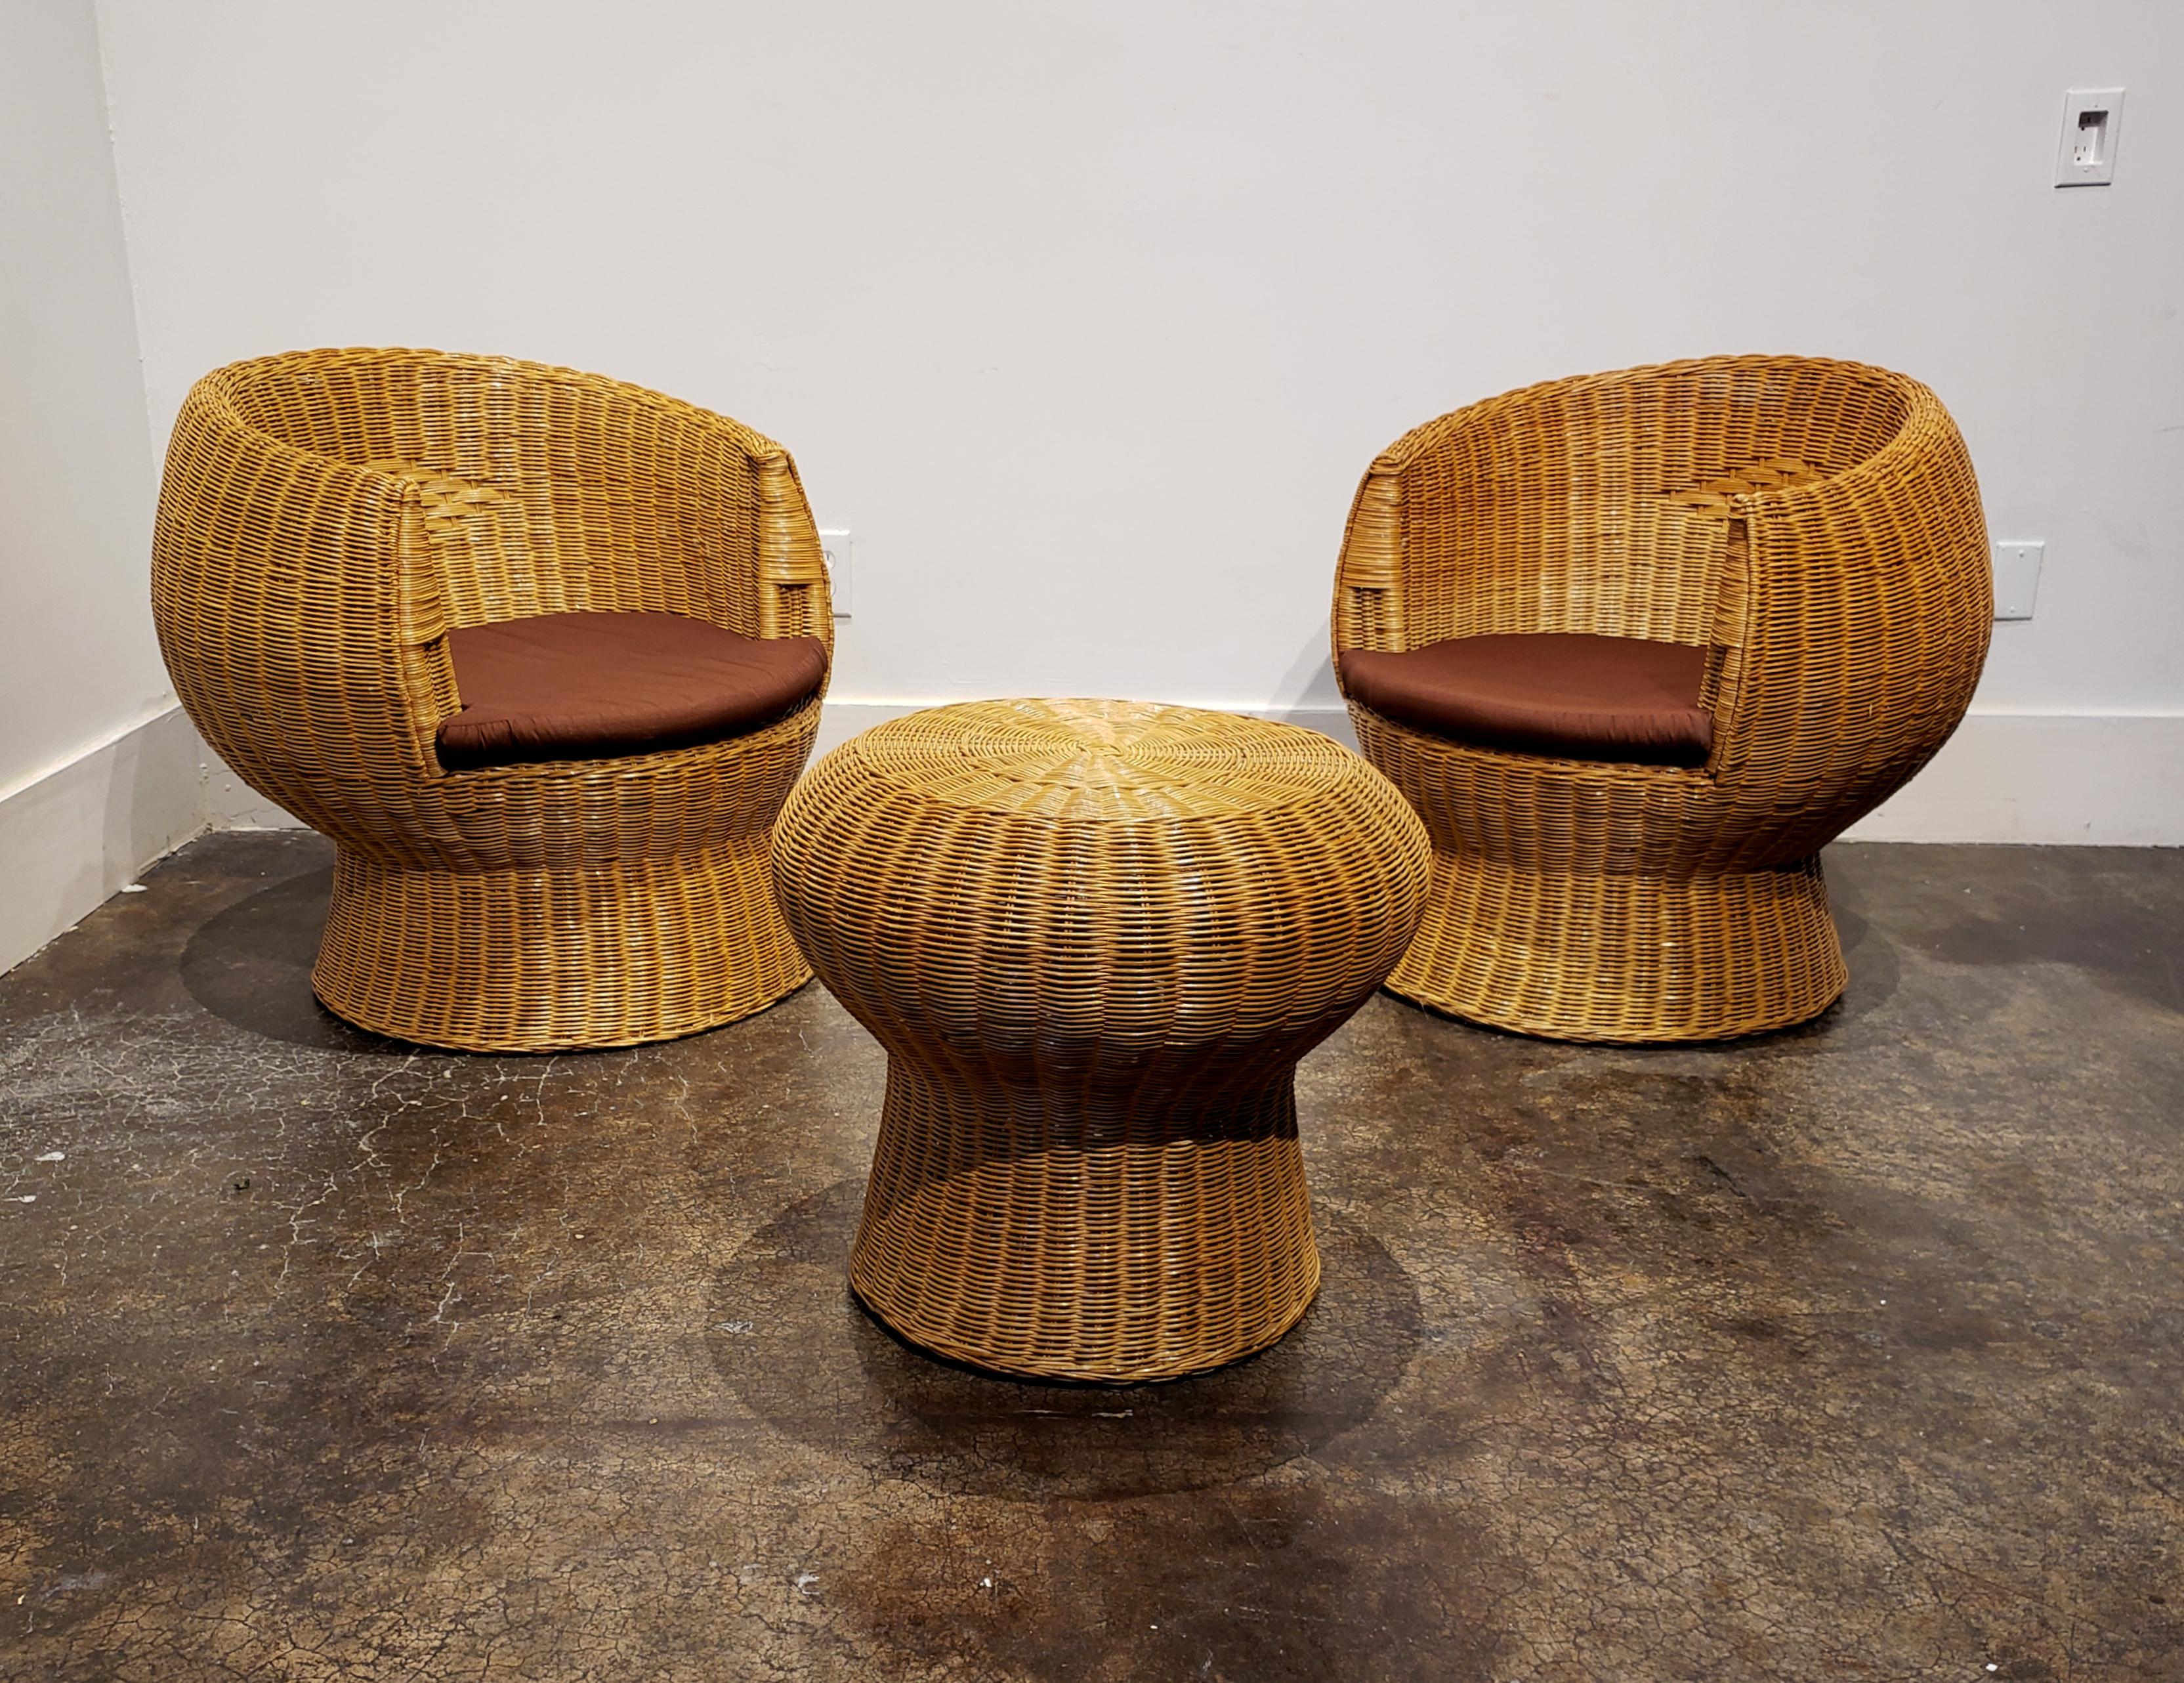 1970s modern patio wicker set with two chairs and one side table. Beautiful rounded shape typical of the 1960s and 1970s Space Age aesthetic. In very good condition with light wear.

Chairs are 29